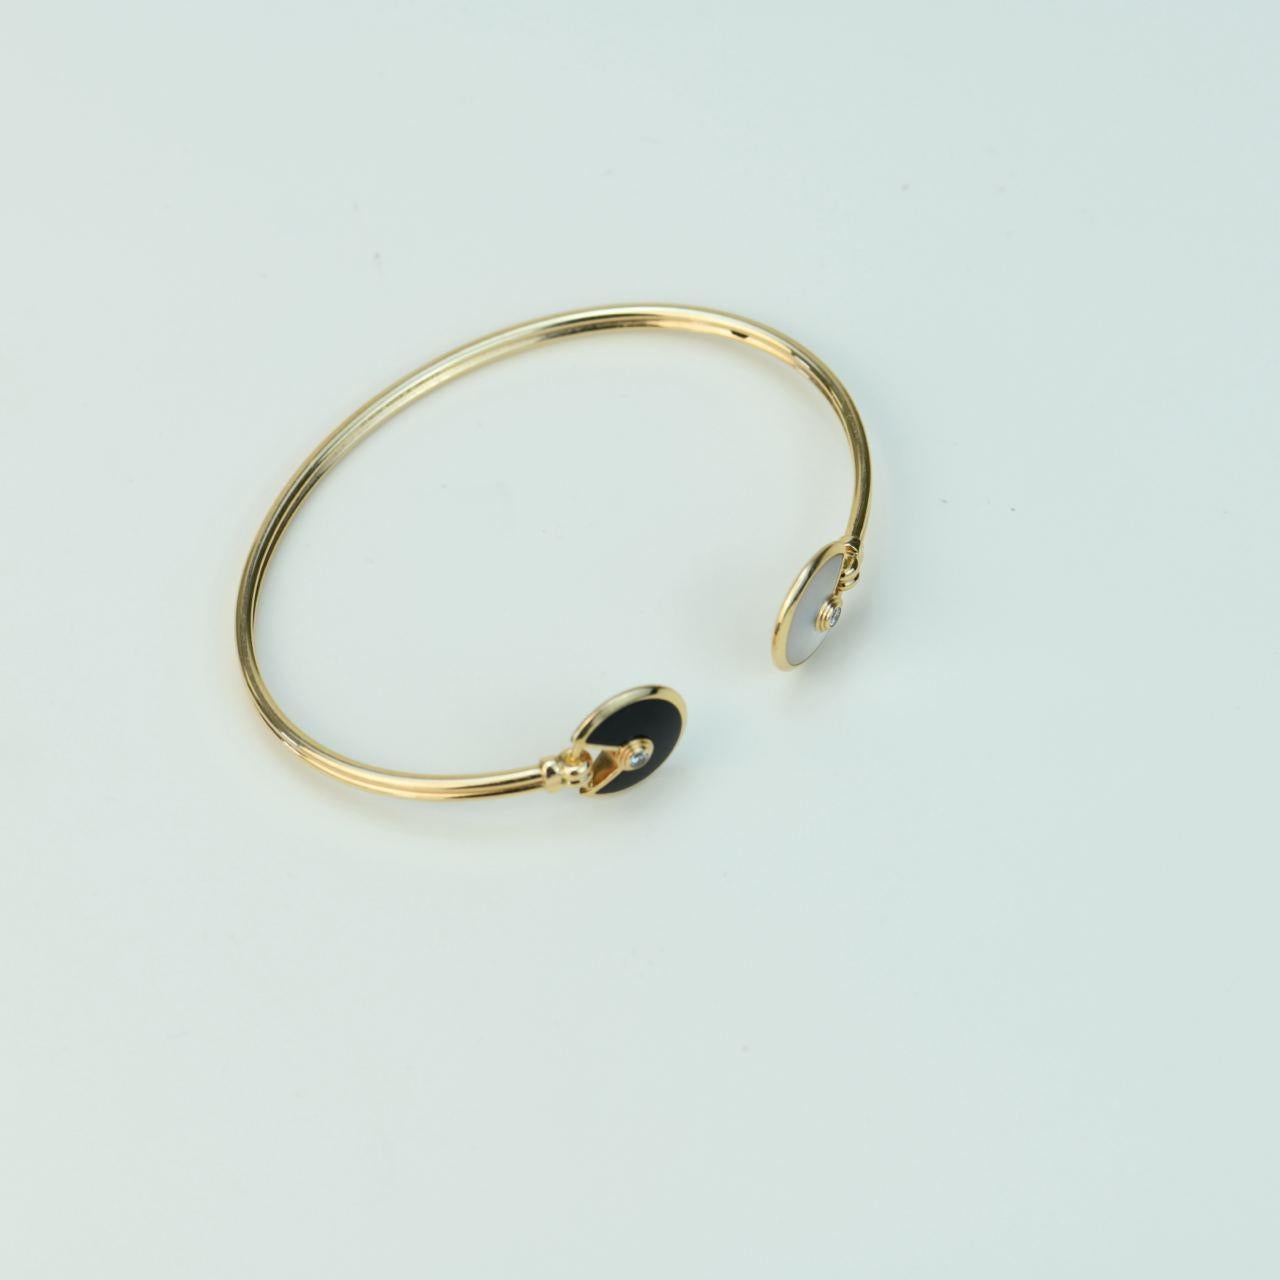 Cartier Amulette Diamond Mother of Pearl and Onyx 18K Yellow Gold Bracelet Size  In Excellent Condition For Sale In Banbury, GB